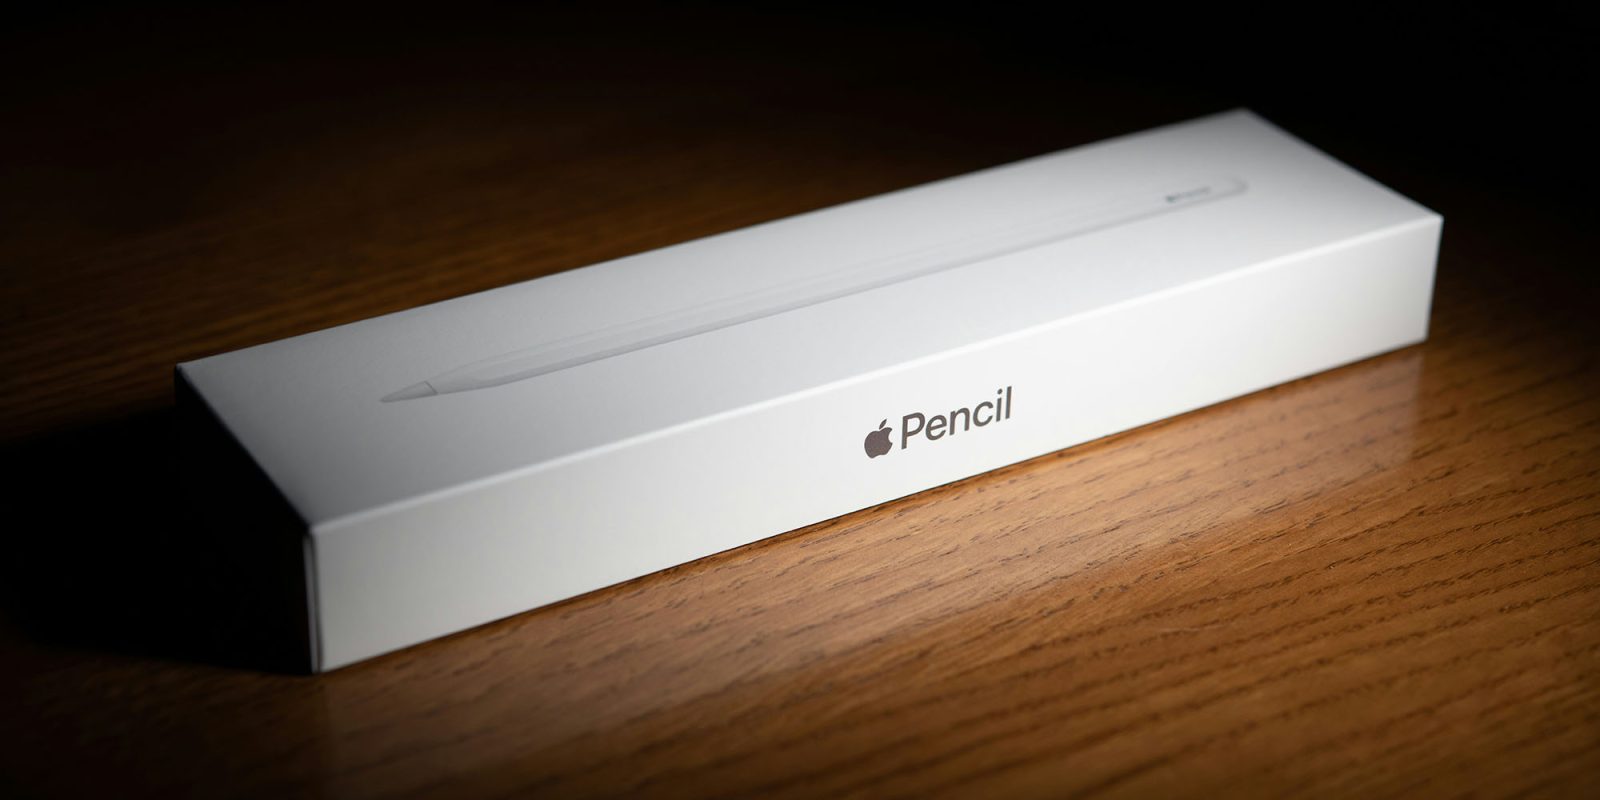 Apple Pencil for Vision Pro (existing model shown, boxed)